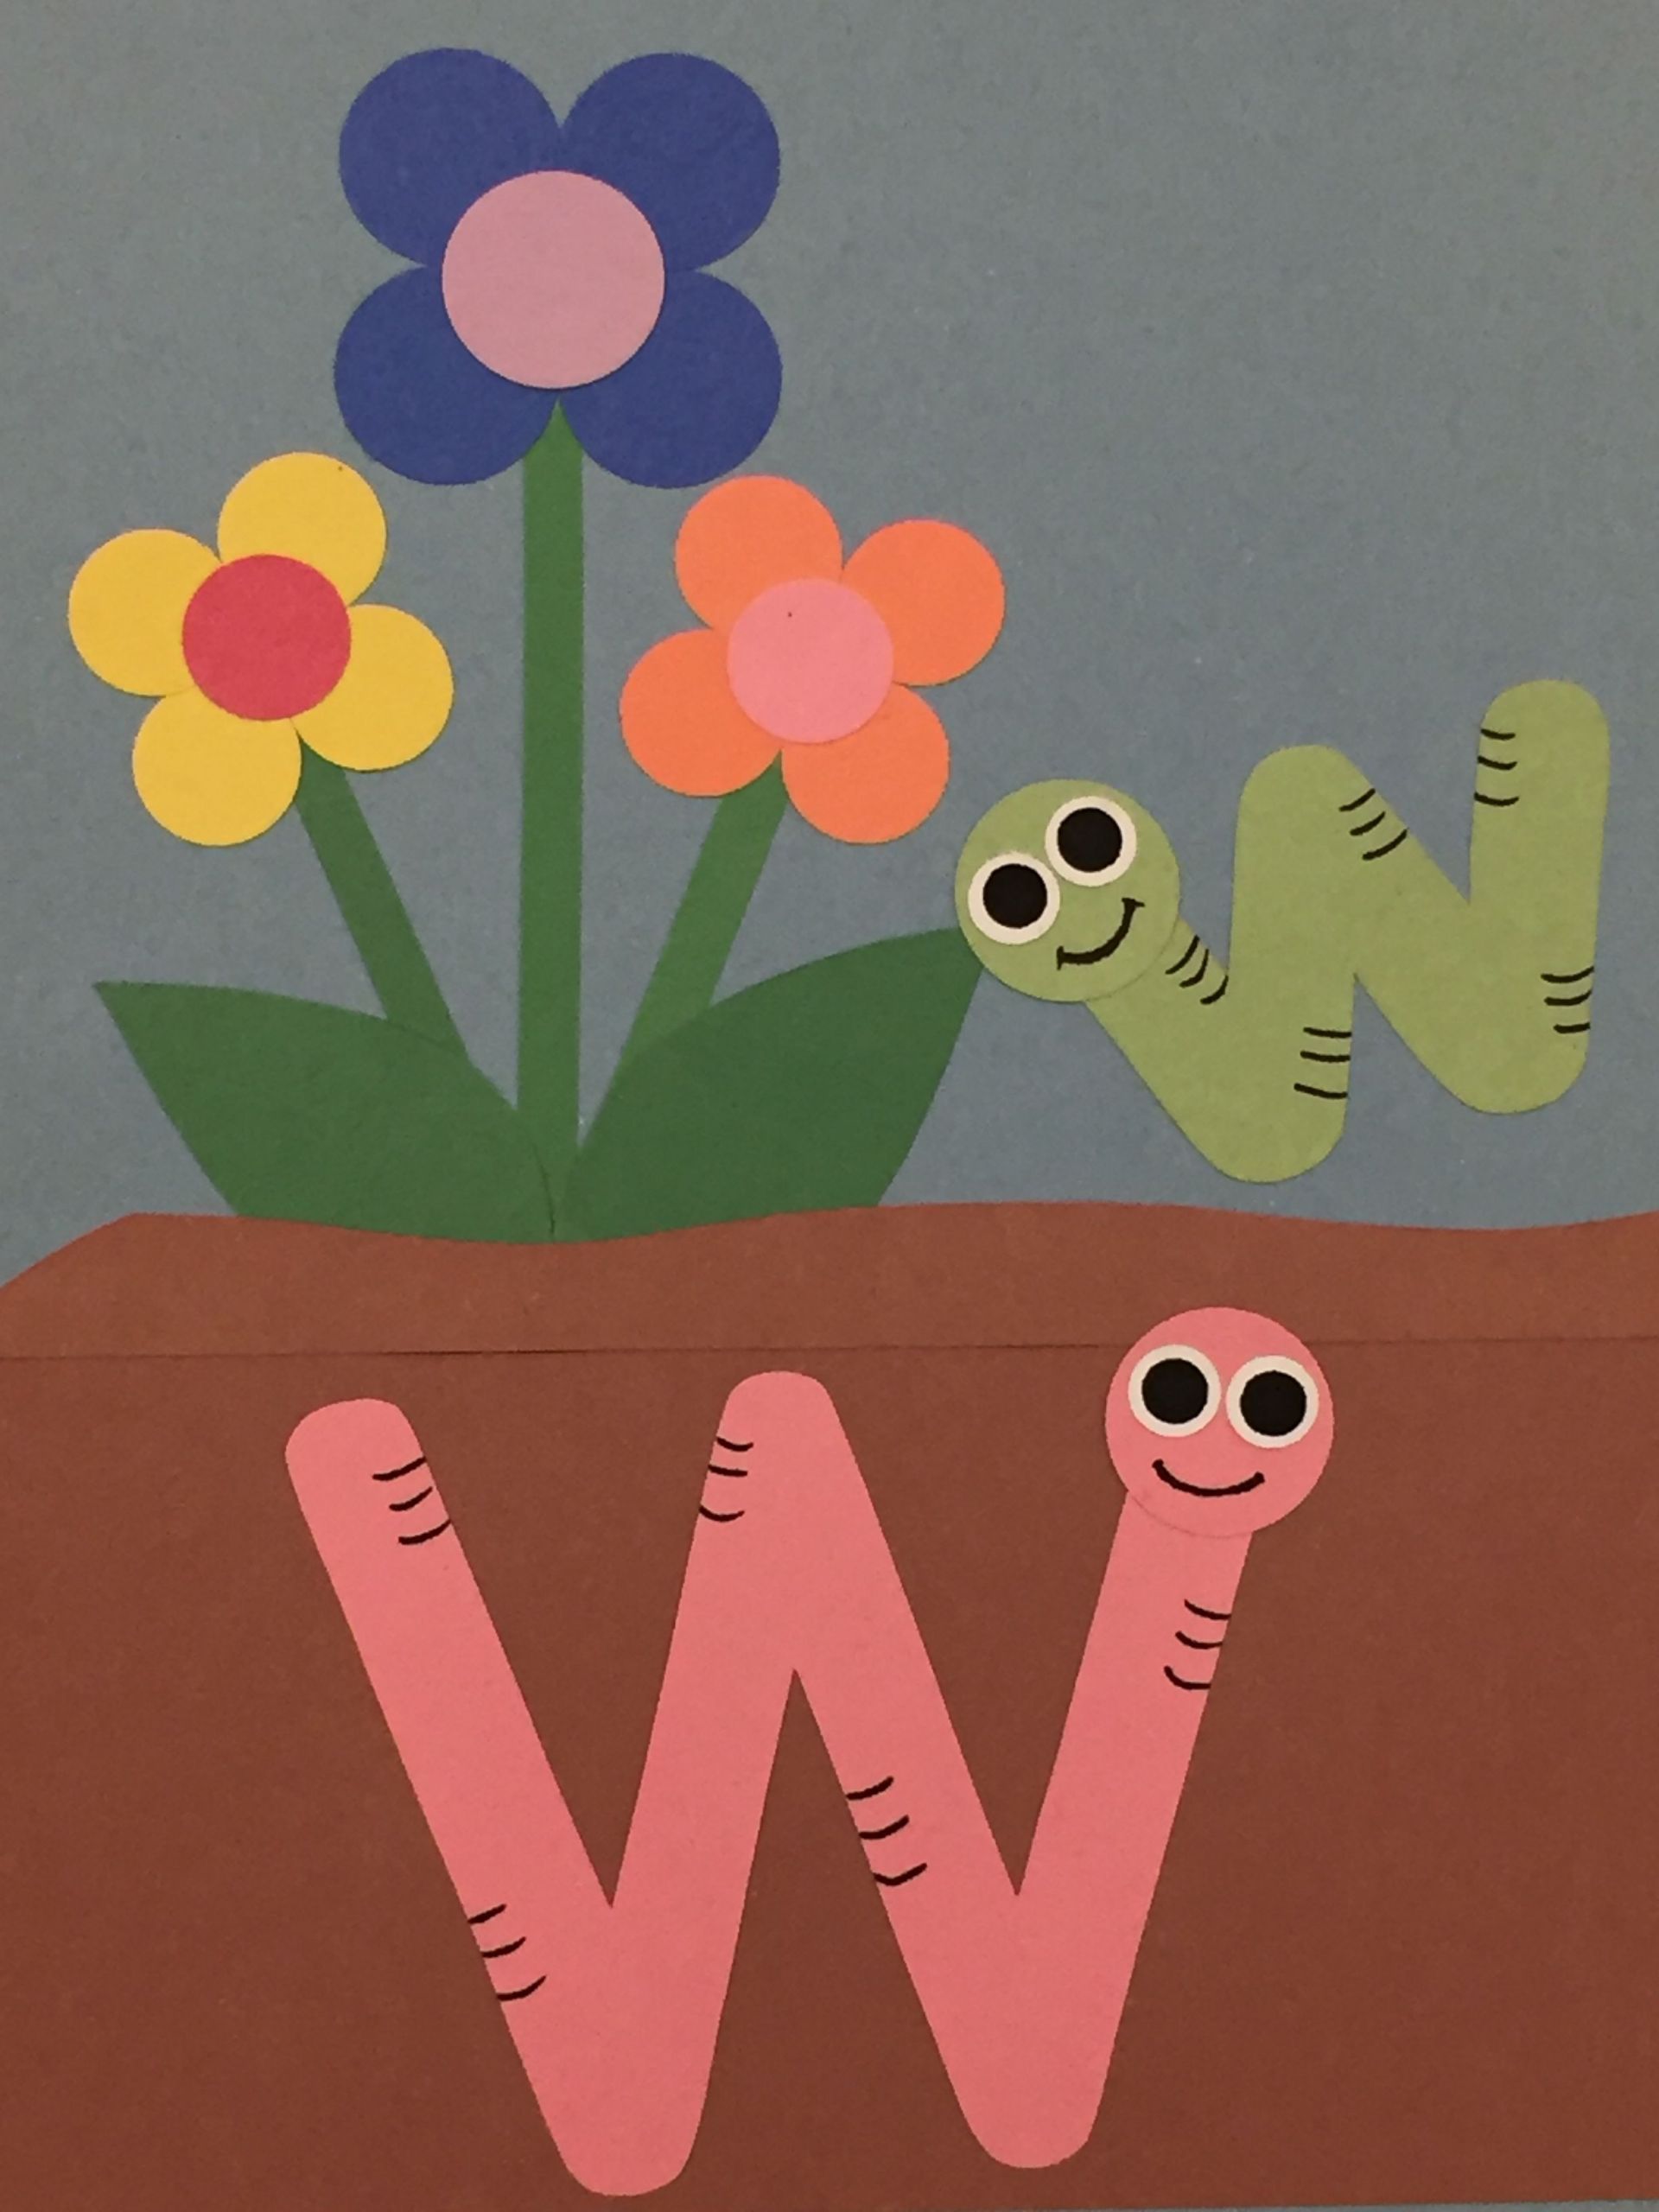 W Crafts For Preschoolers
 W is for worm